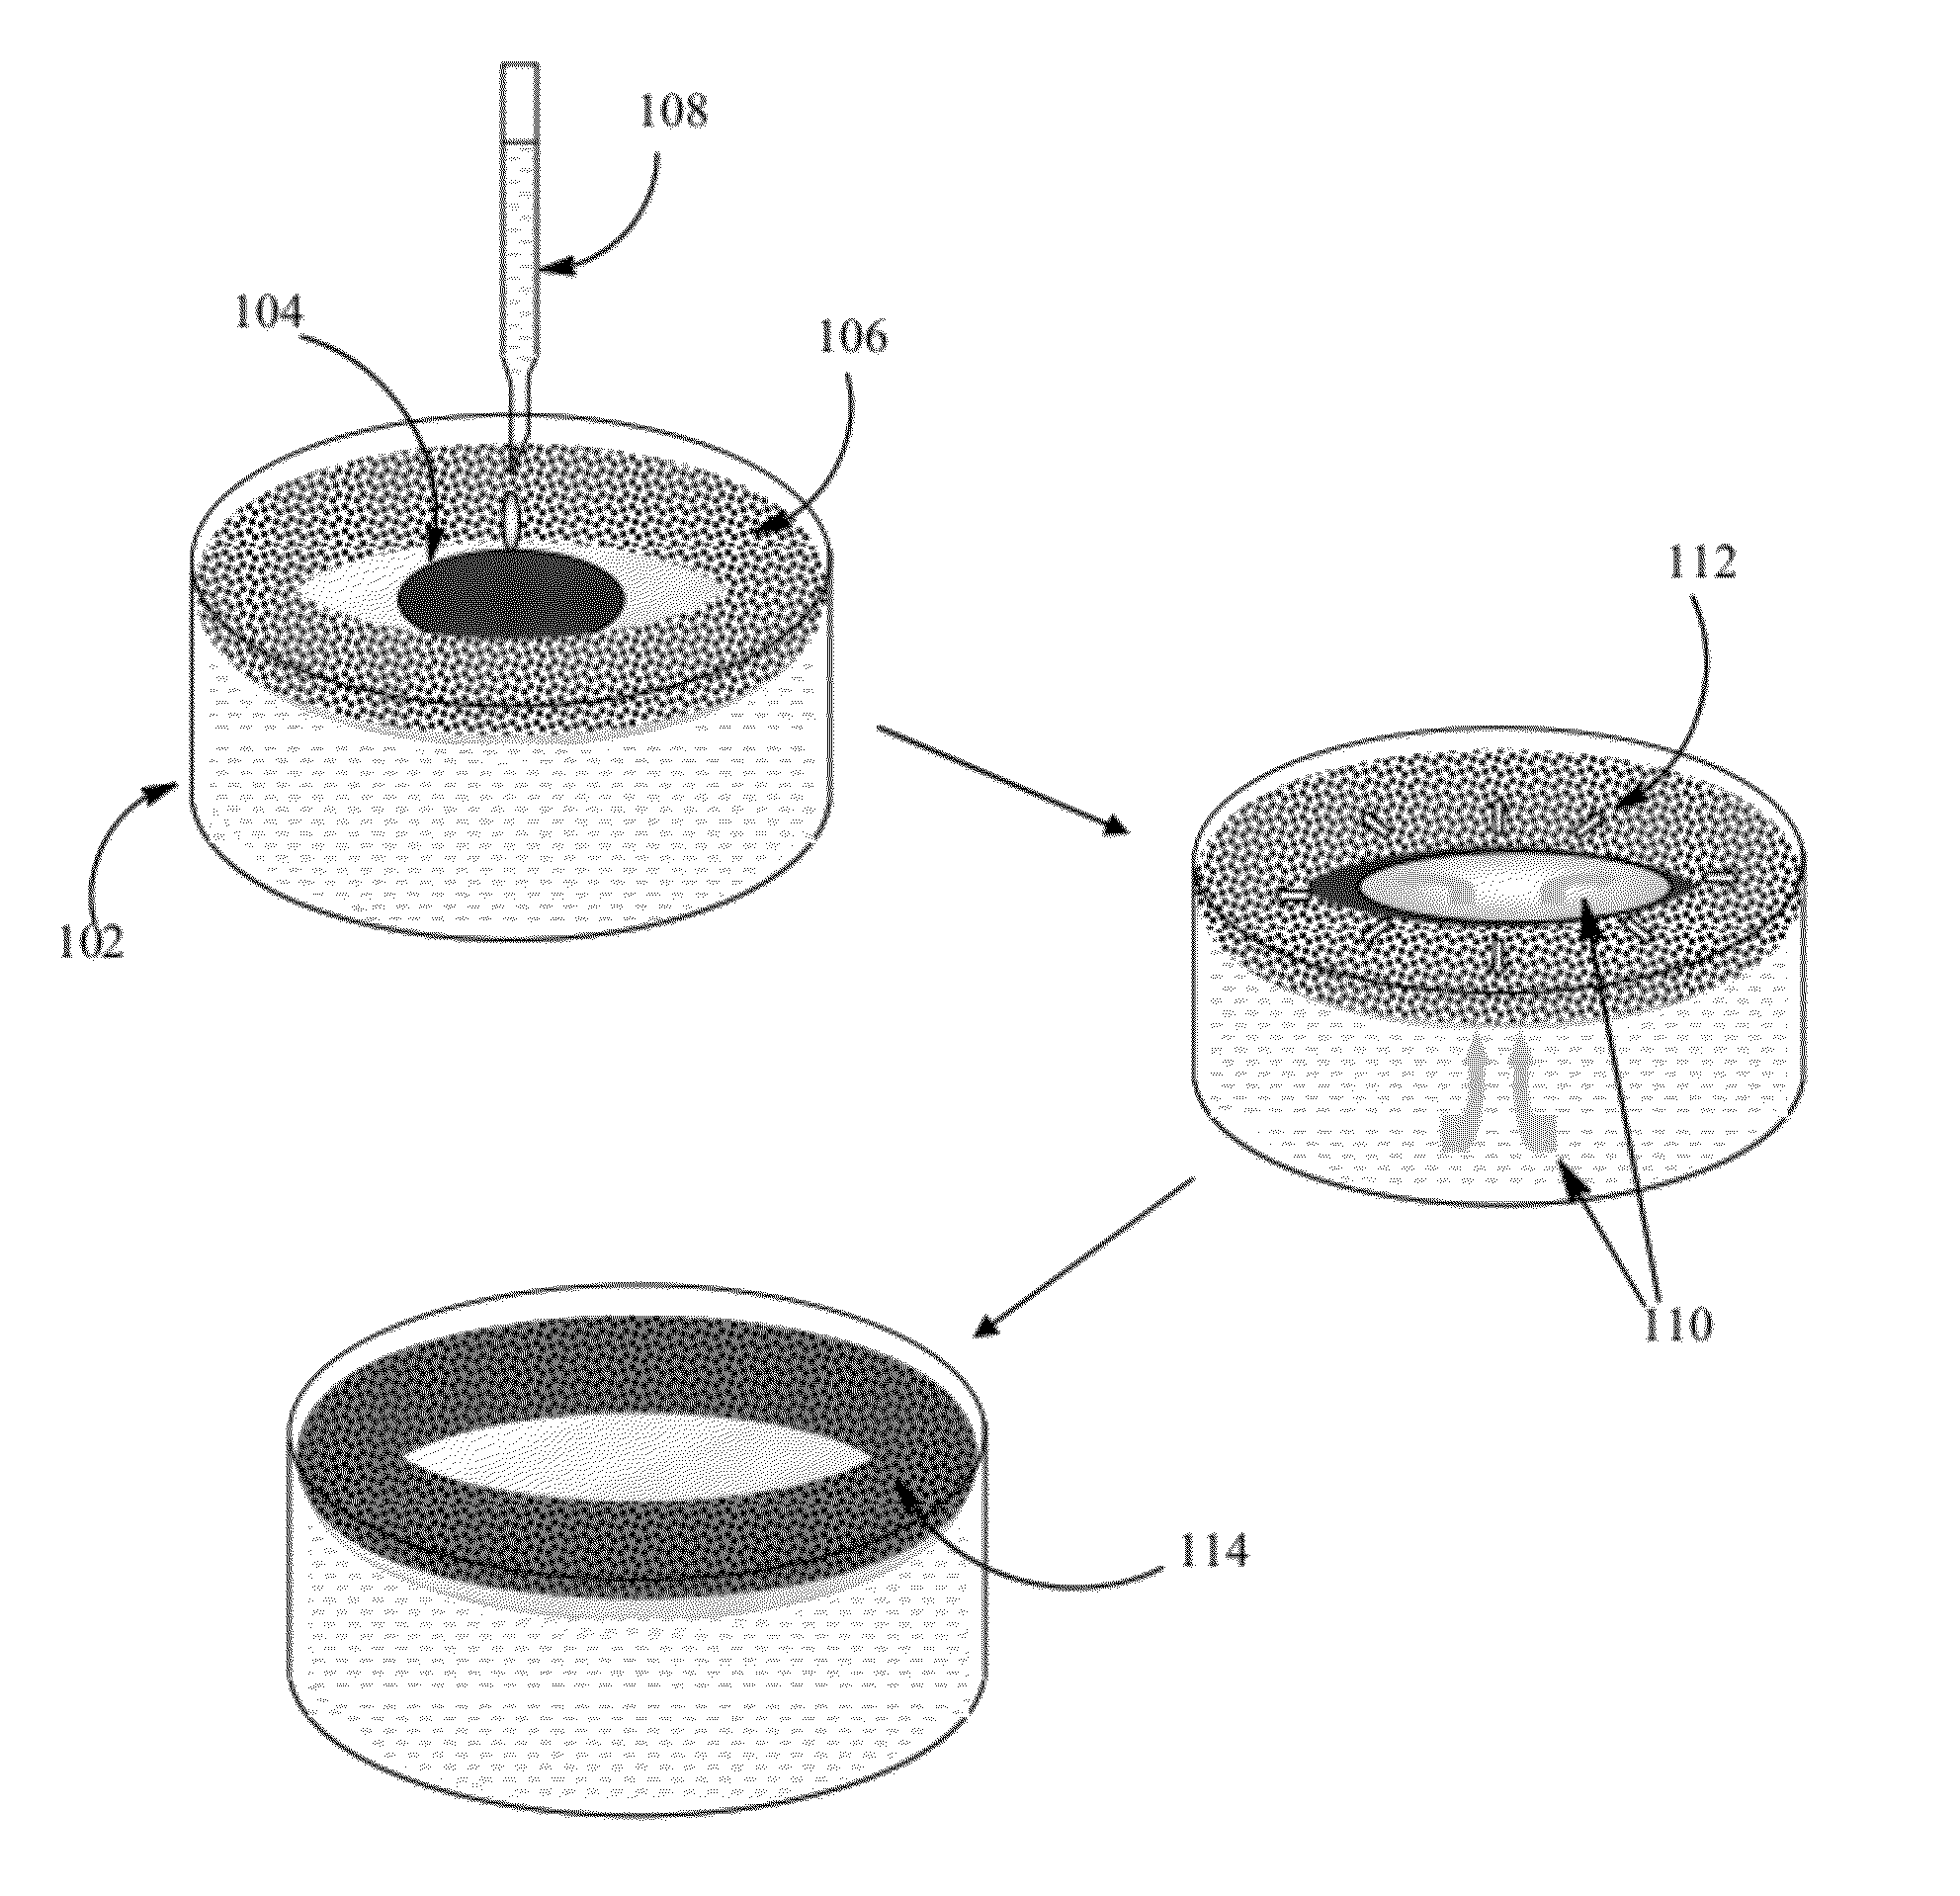 Method of herding and collection of oil spilled at the aquatic surface